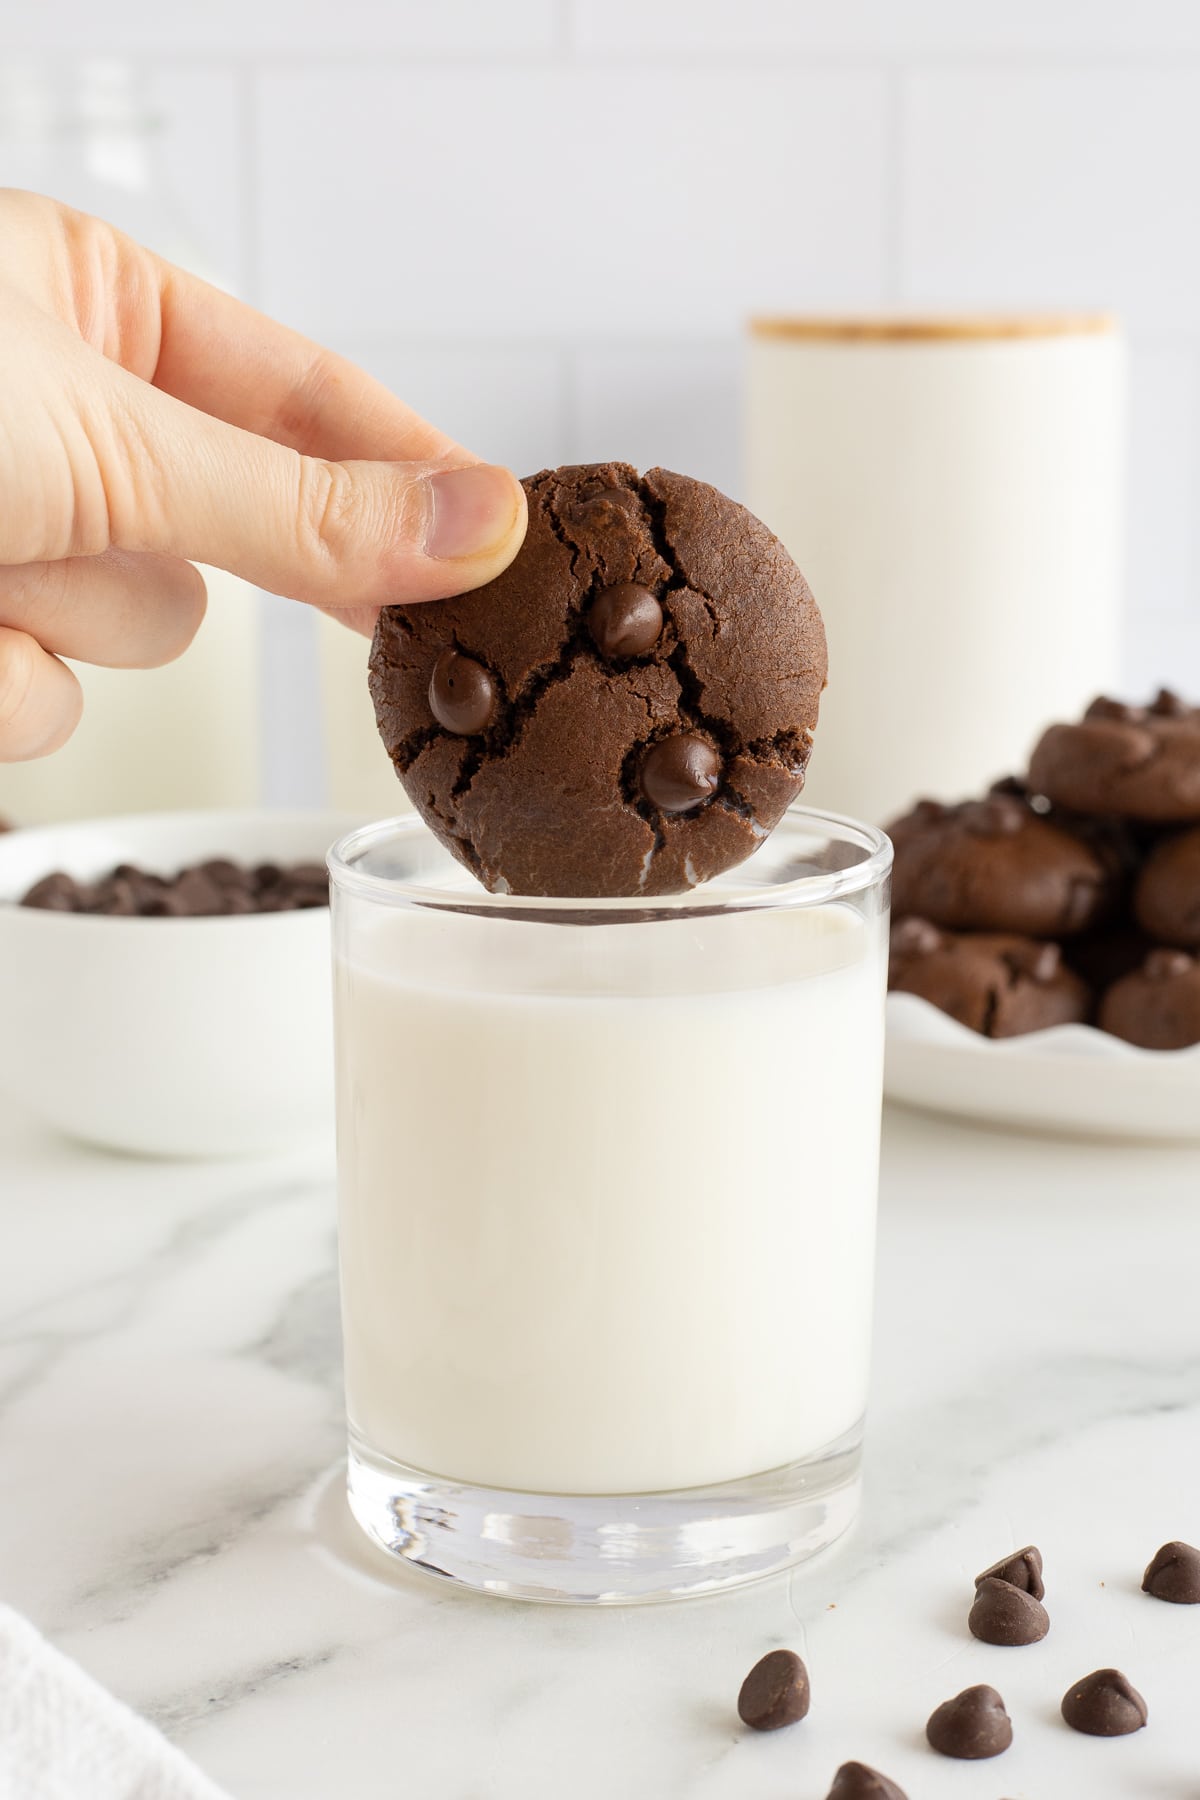 A hand dipping a chocolate cookie with chocolate chips into a glass of milk.